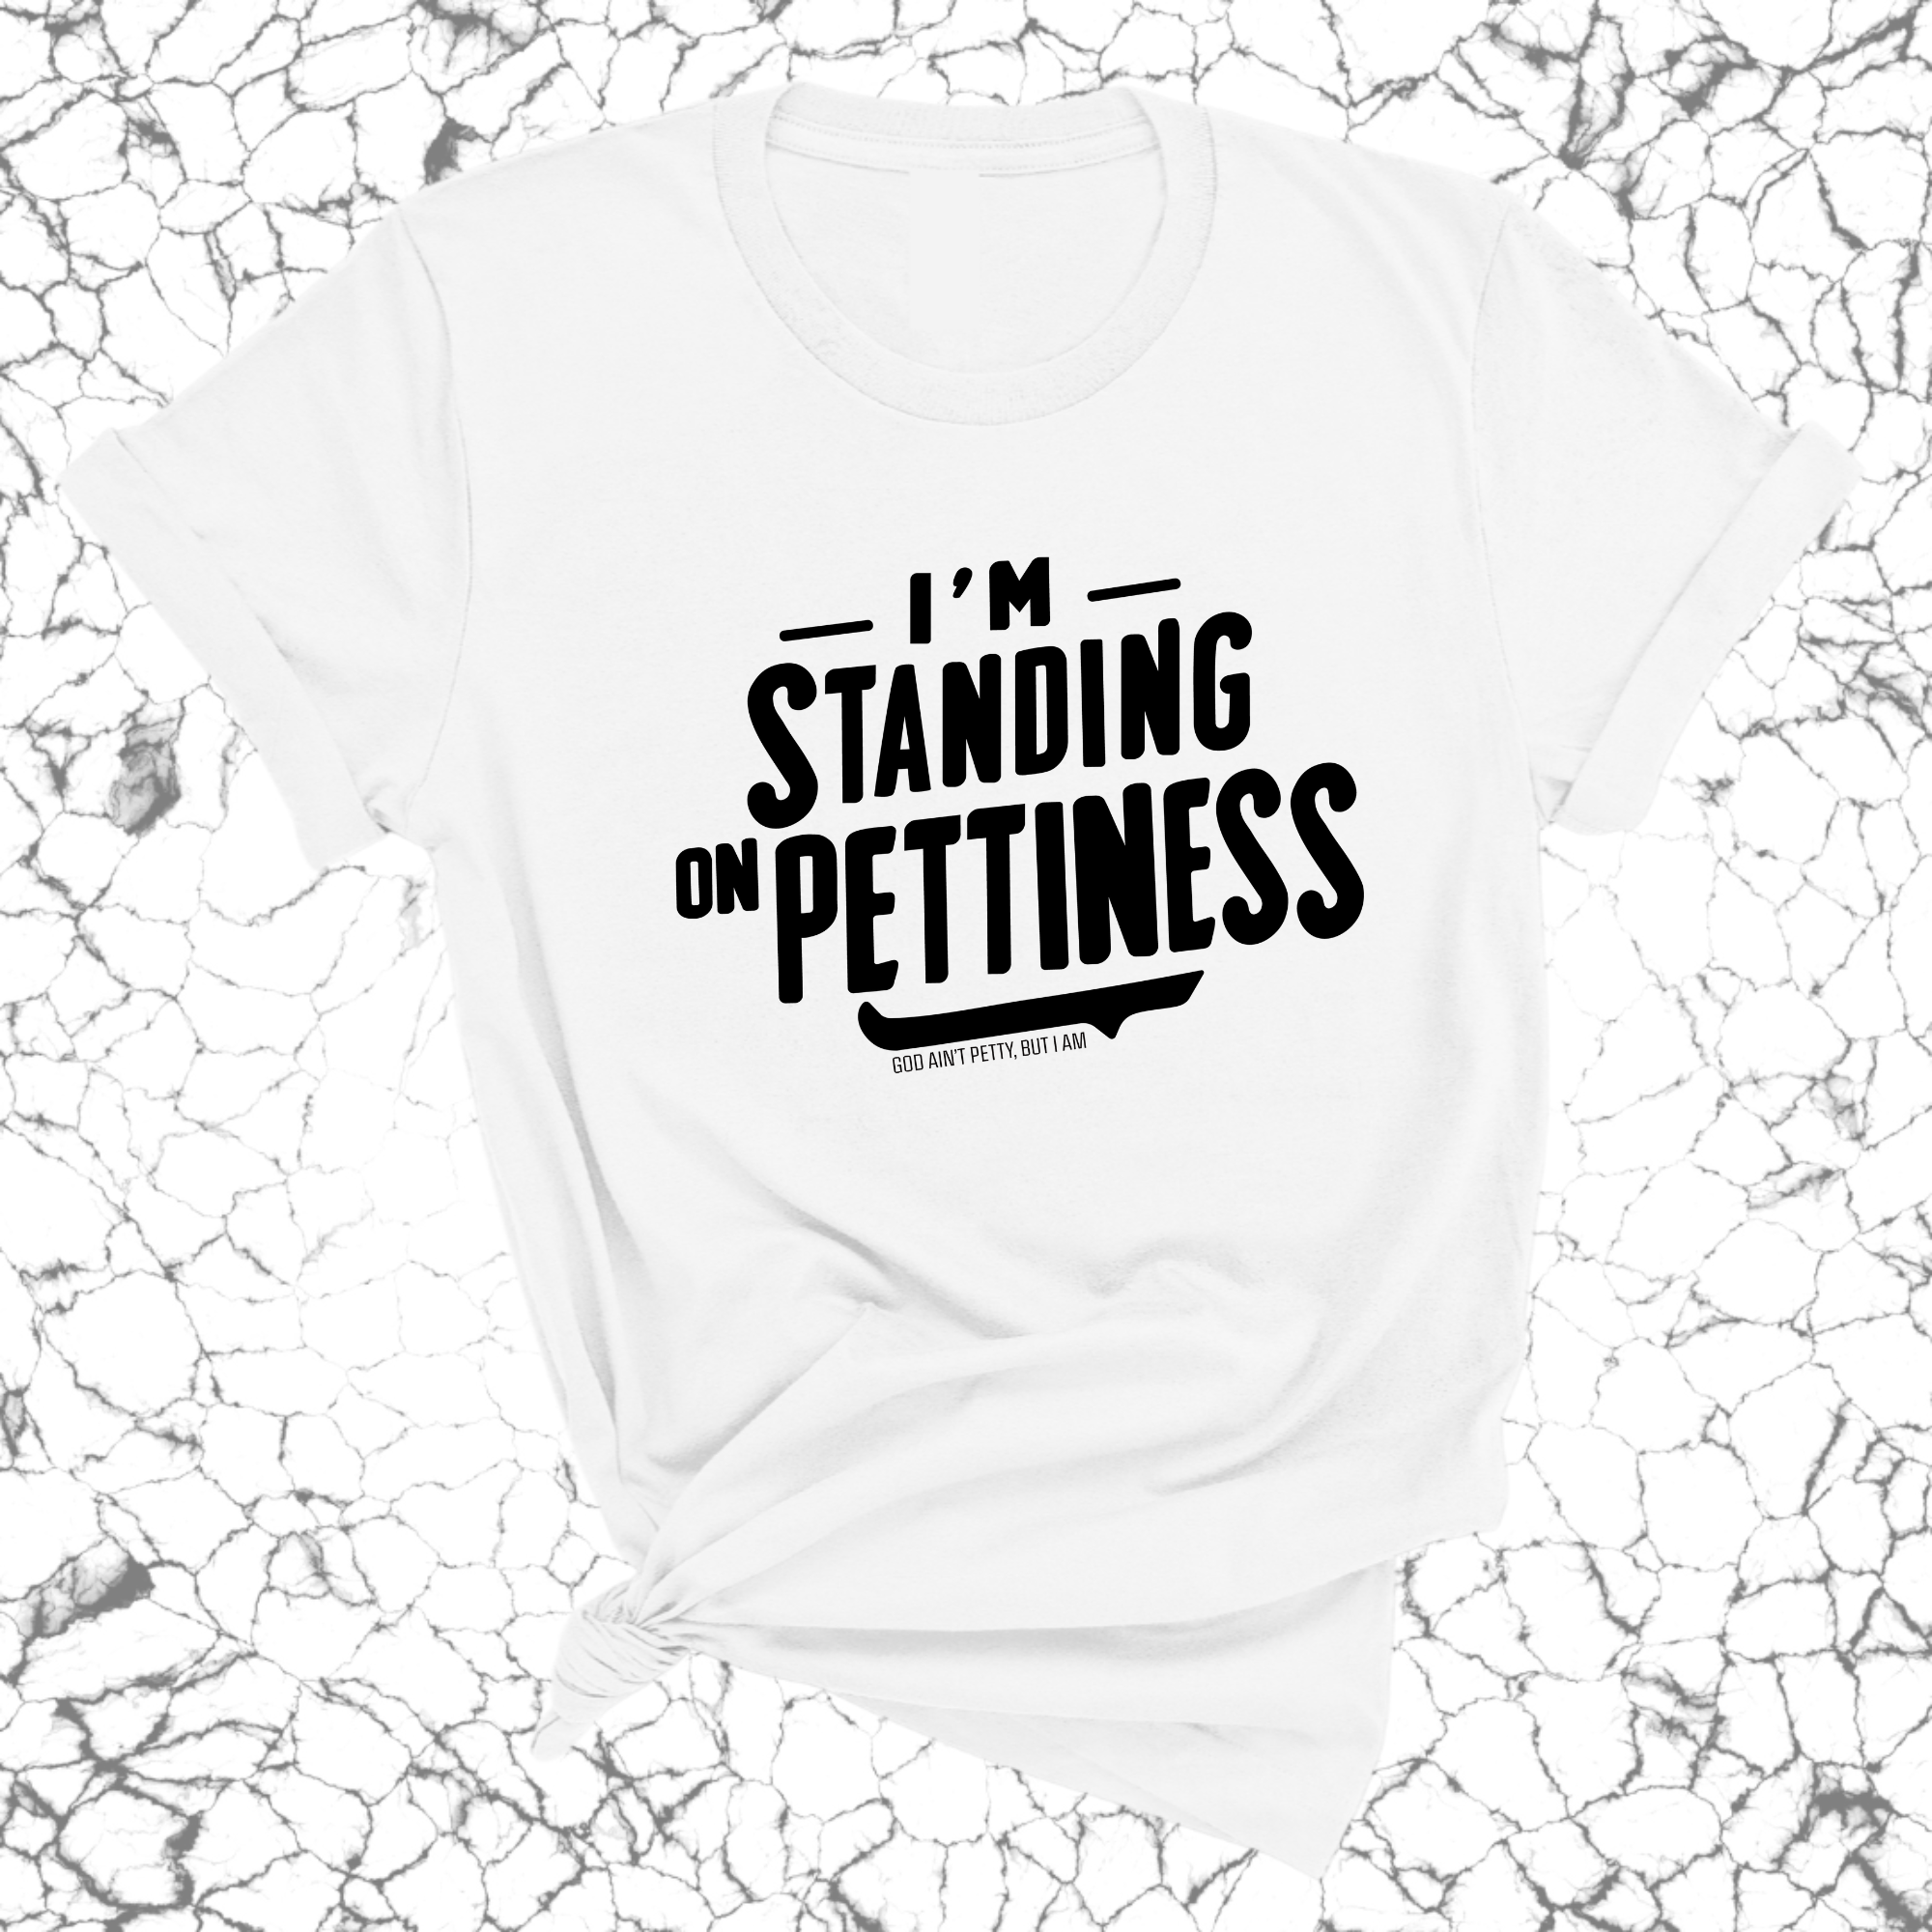 I'm Standing on Pettiness Unisex Tee-T-Shirt-The Original God Ain't Petty But I Am